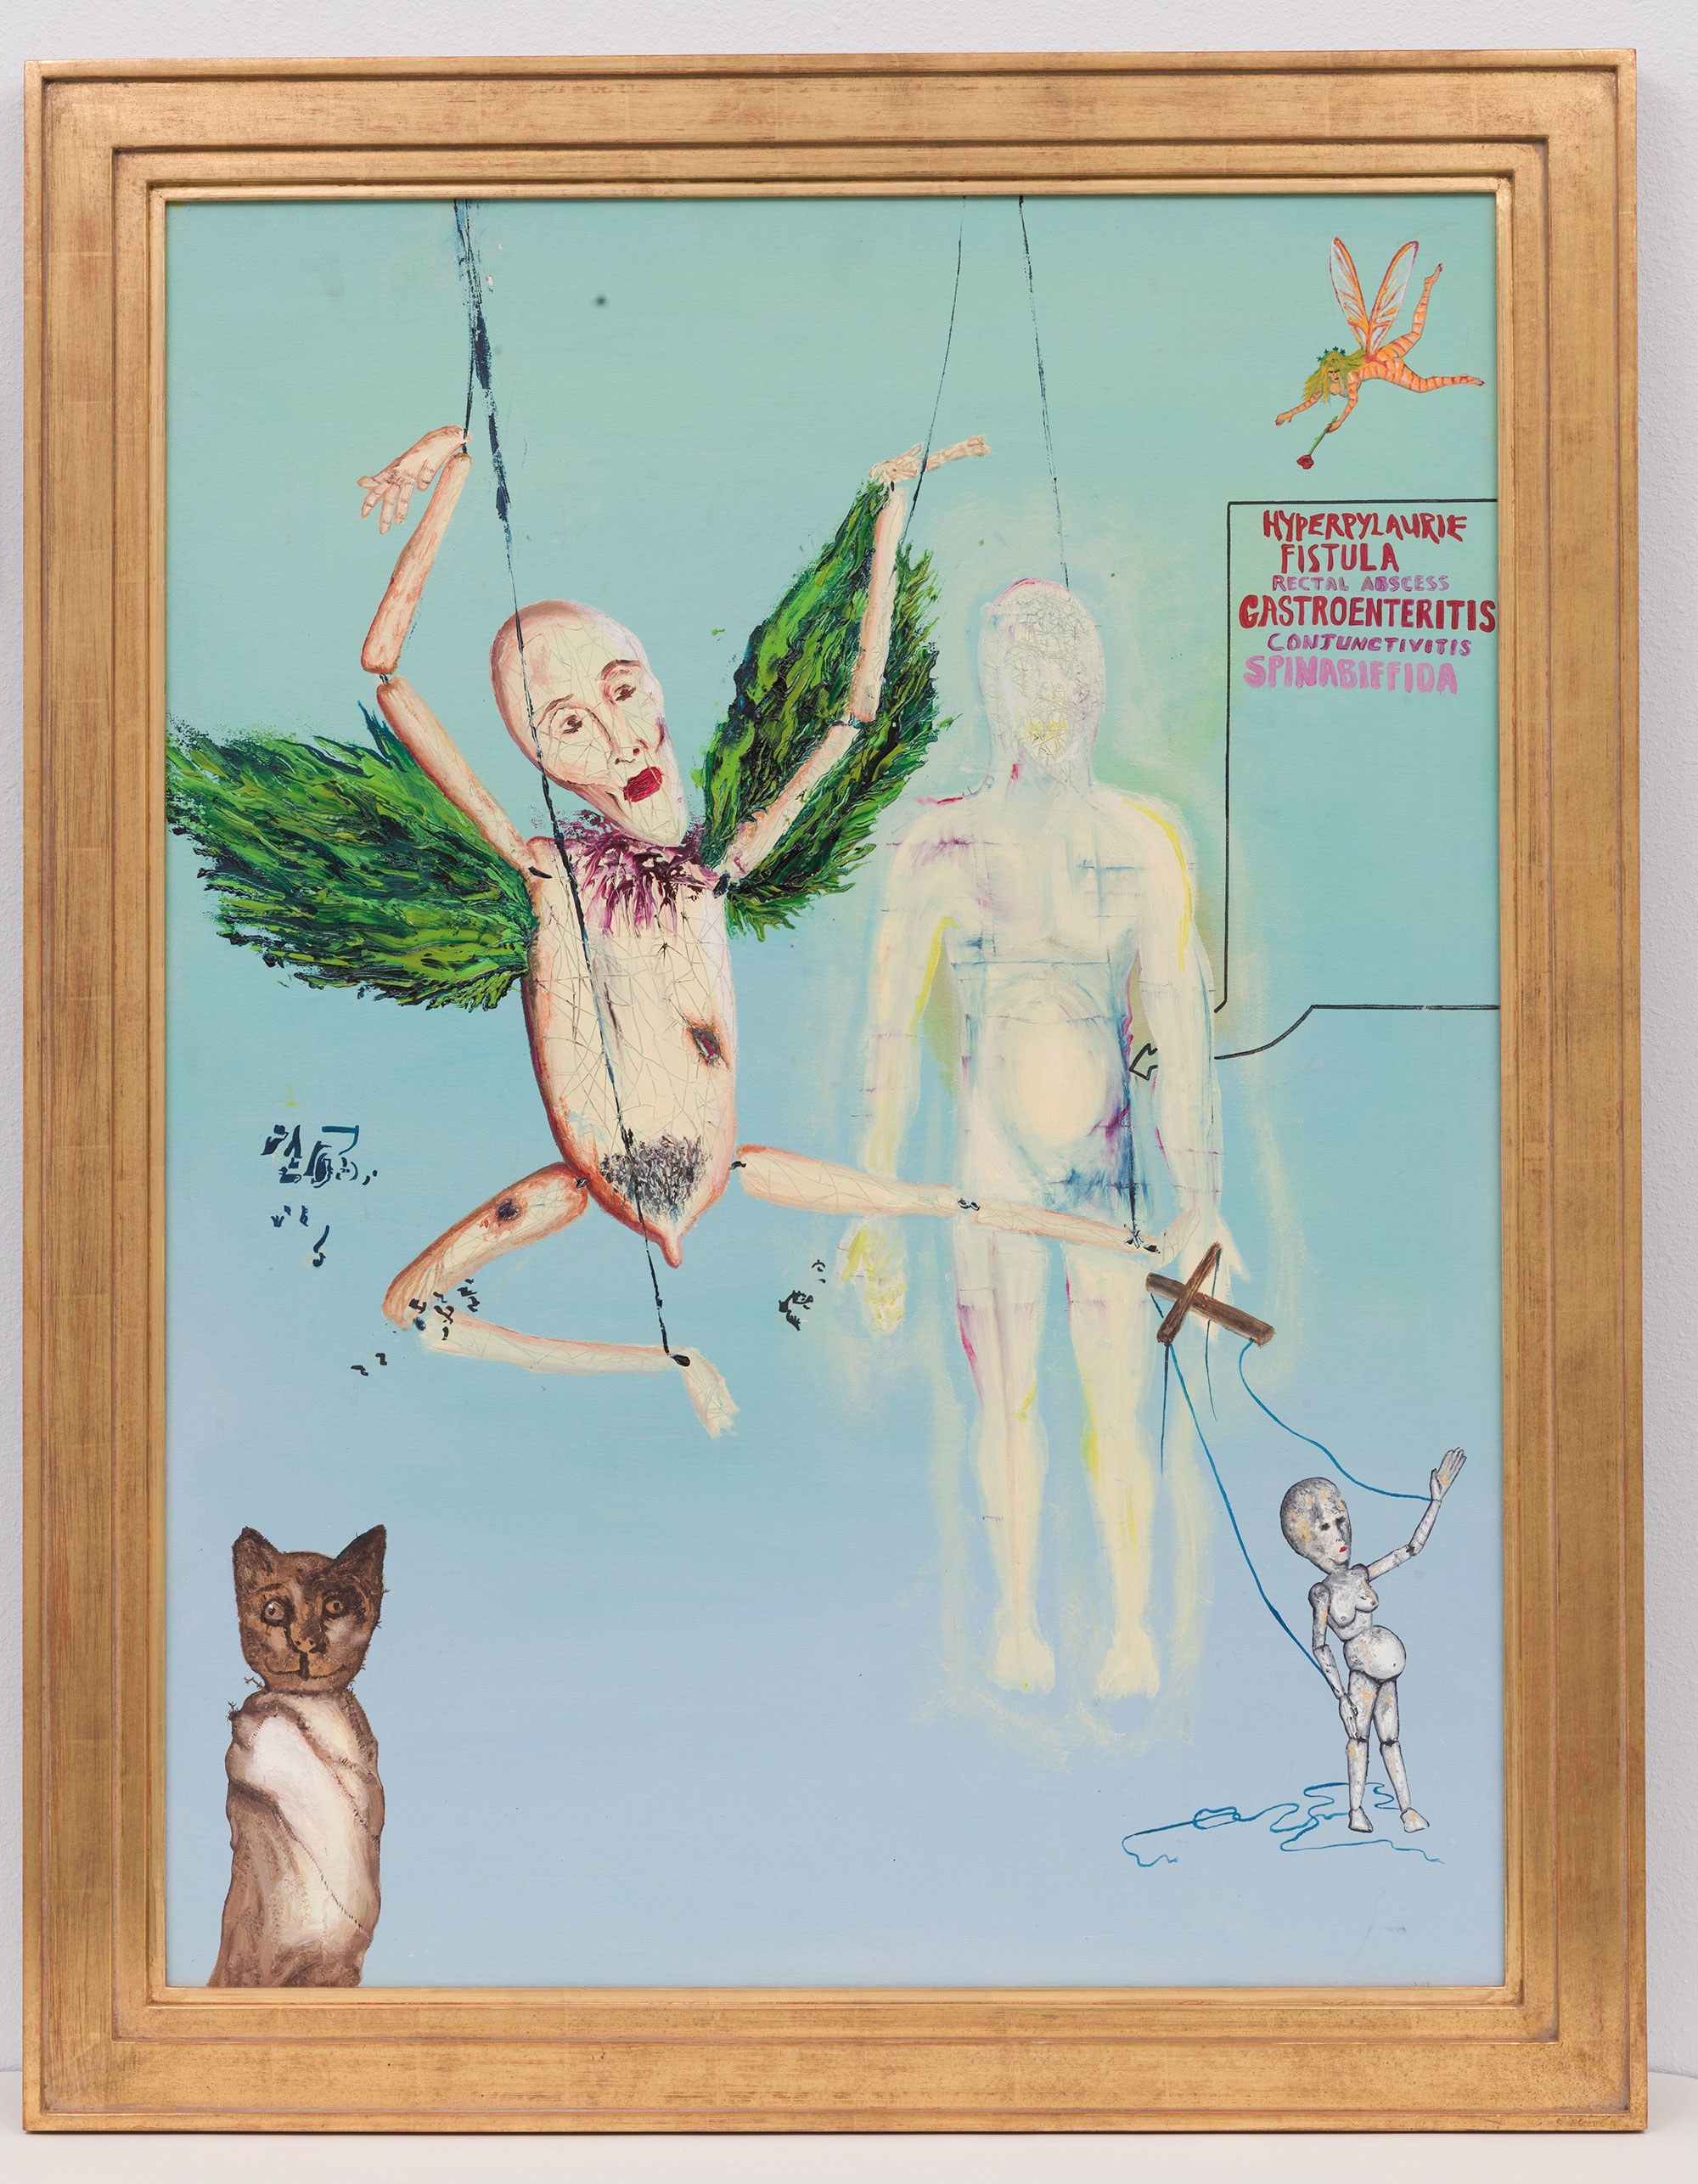 This painting appears to be unfinished. On a pale blue background are several human-like figures. On the left side is a large nude marionette with green, furry wings, a masculine face, wounds on its abdomen and thigh, and pubic hair around a genital-like nub between its legs. It seems to be flying. On the right is a large, white, faceless human male form with a glowing aura around his body holding the controls of a small, female marionette with a pregnant belly, bulbous bald head, and several broken strings still attached to her. In the upper right corner is a small winged fairy-like figure with red stripes all over her body, and holding a rose in her hand. In the lower left corner is a small brown cat in a straight jacket, or perhaps it is mummified. A word bubble pointing to the abdomen of the large male figure says, HYPERPYLAURIE FISTULA, RECTAL ABSCESS, GASTROENTERITIS, CONJUNCTIVITIS, SPINABIFFIDA. There is space below the words, suggesting more was to be added. Small black squiggles appear near the knee of the large marionette.